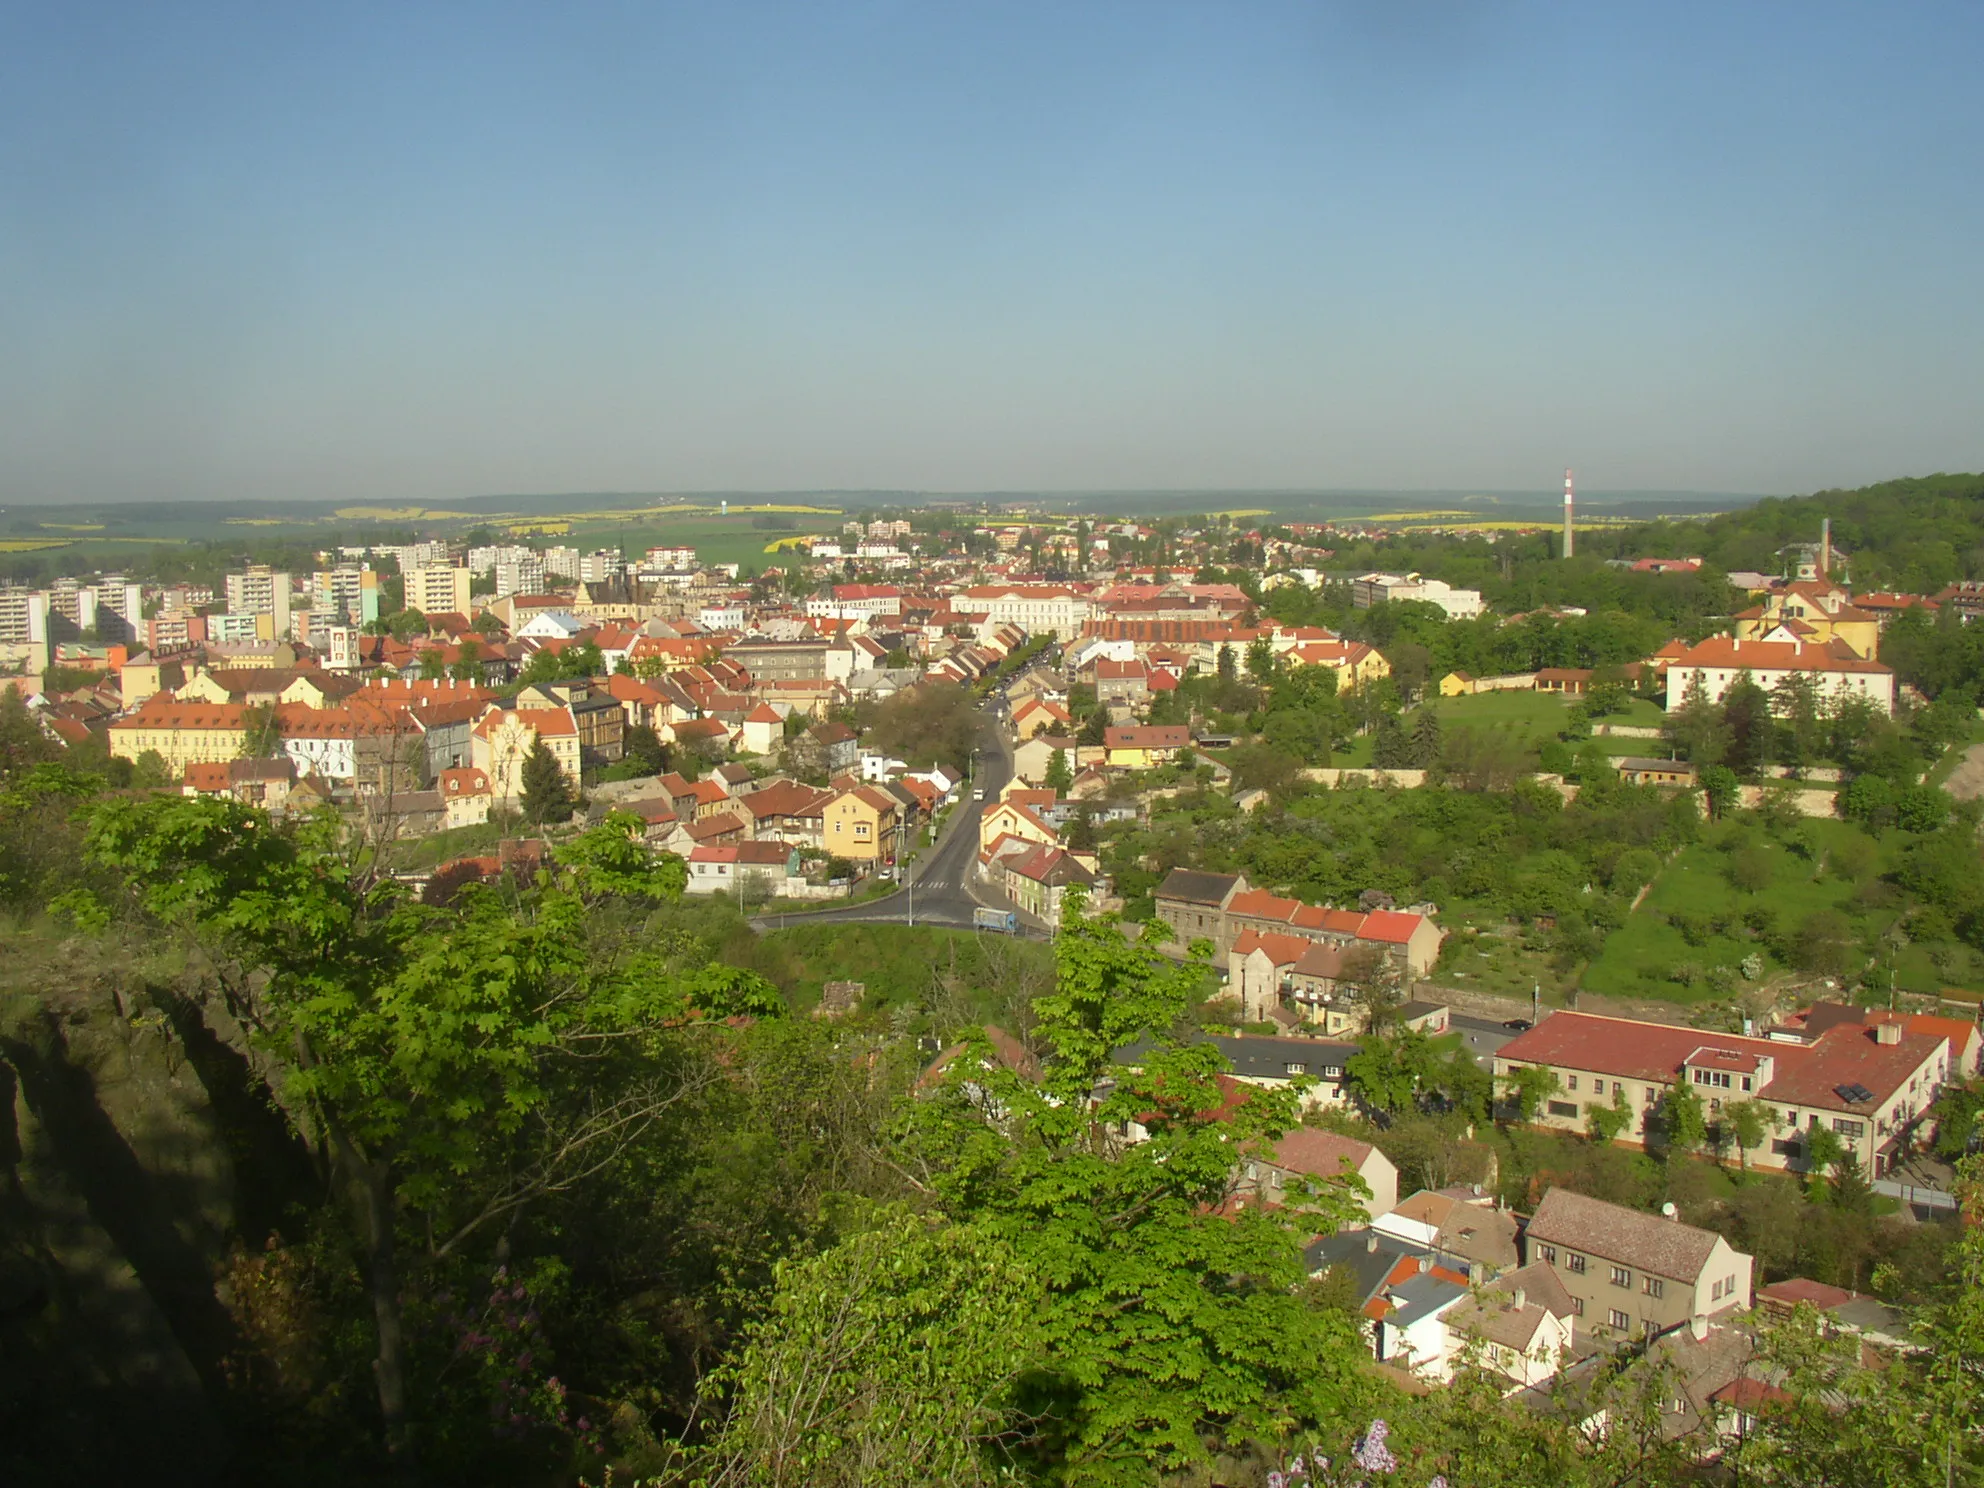 Photo showing: Town of Slaný, Czech Republic, as seen from summit of the Slánská hora hill.